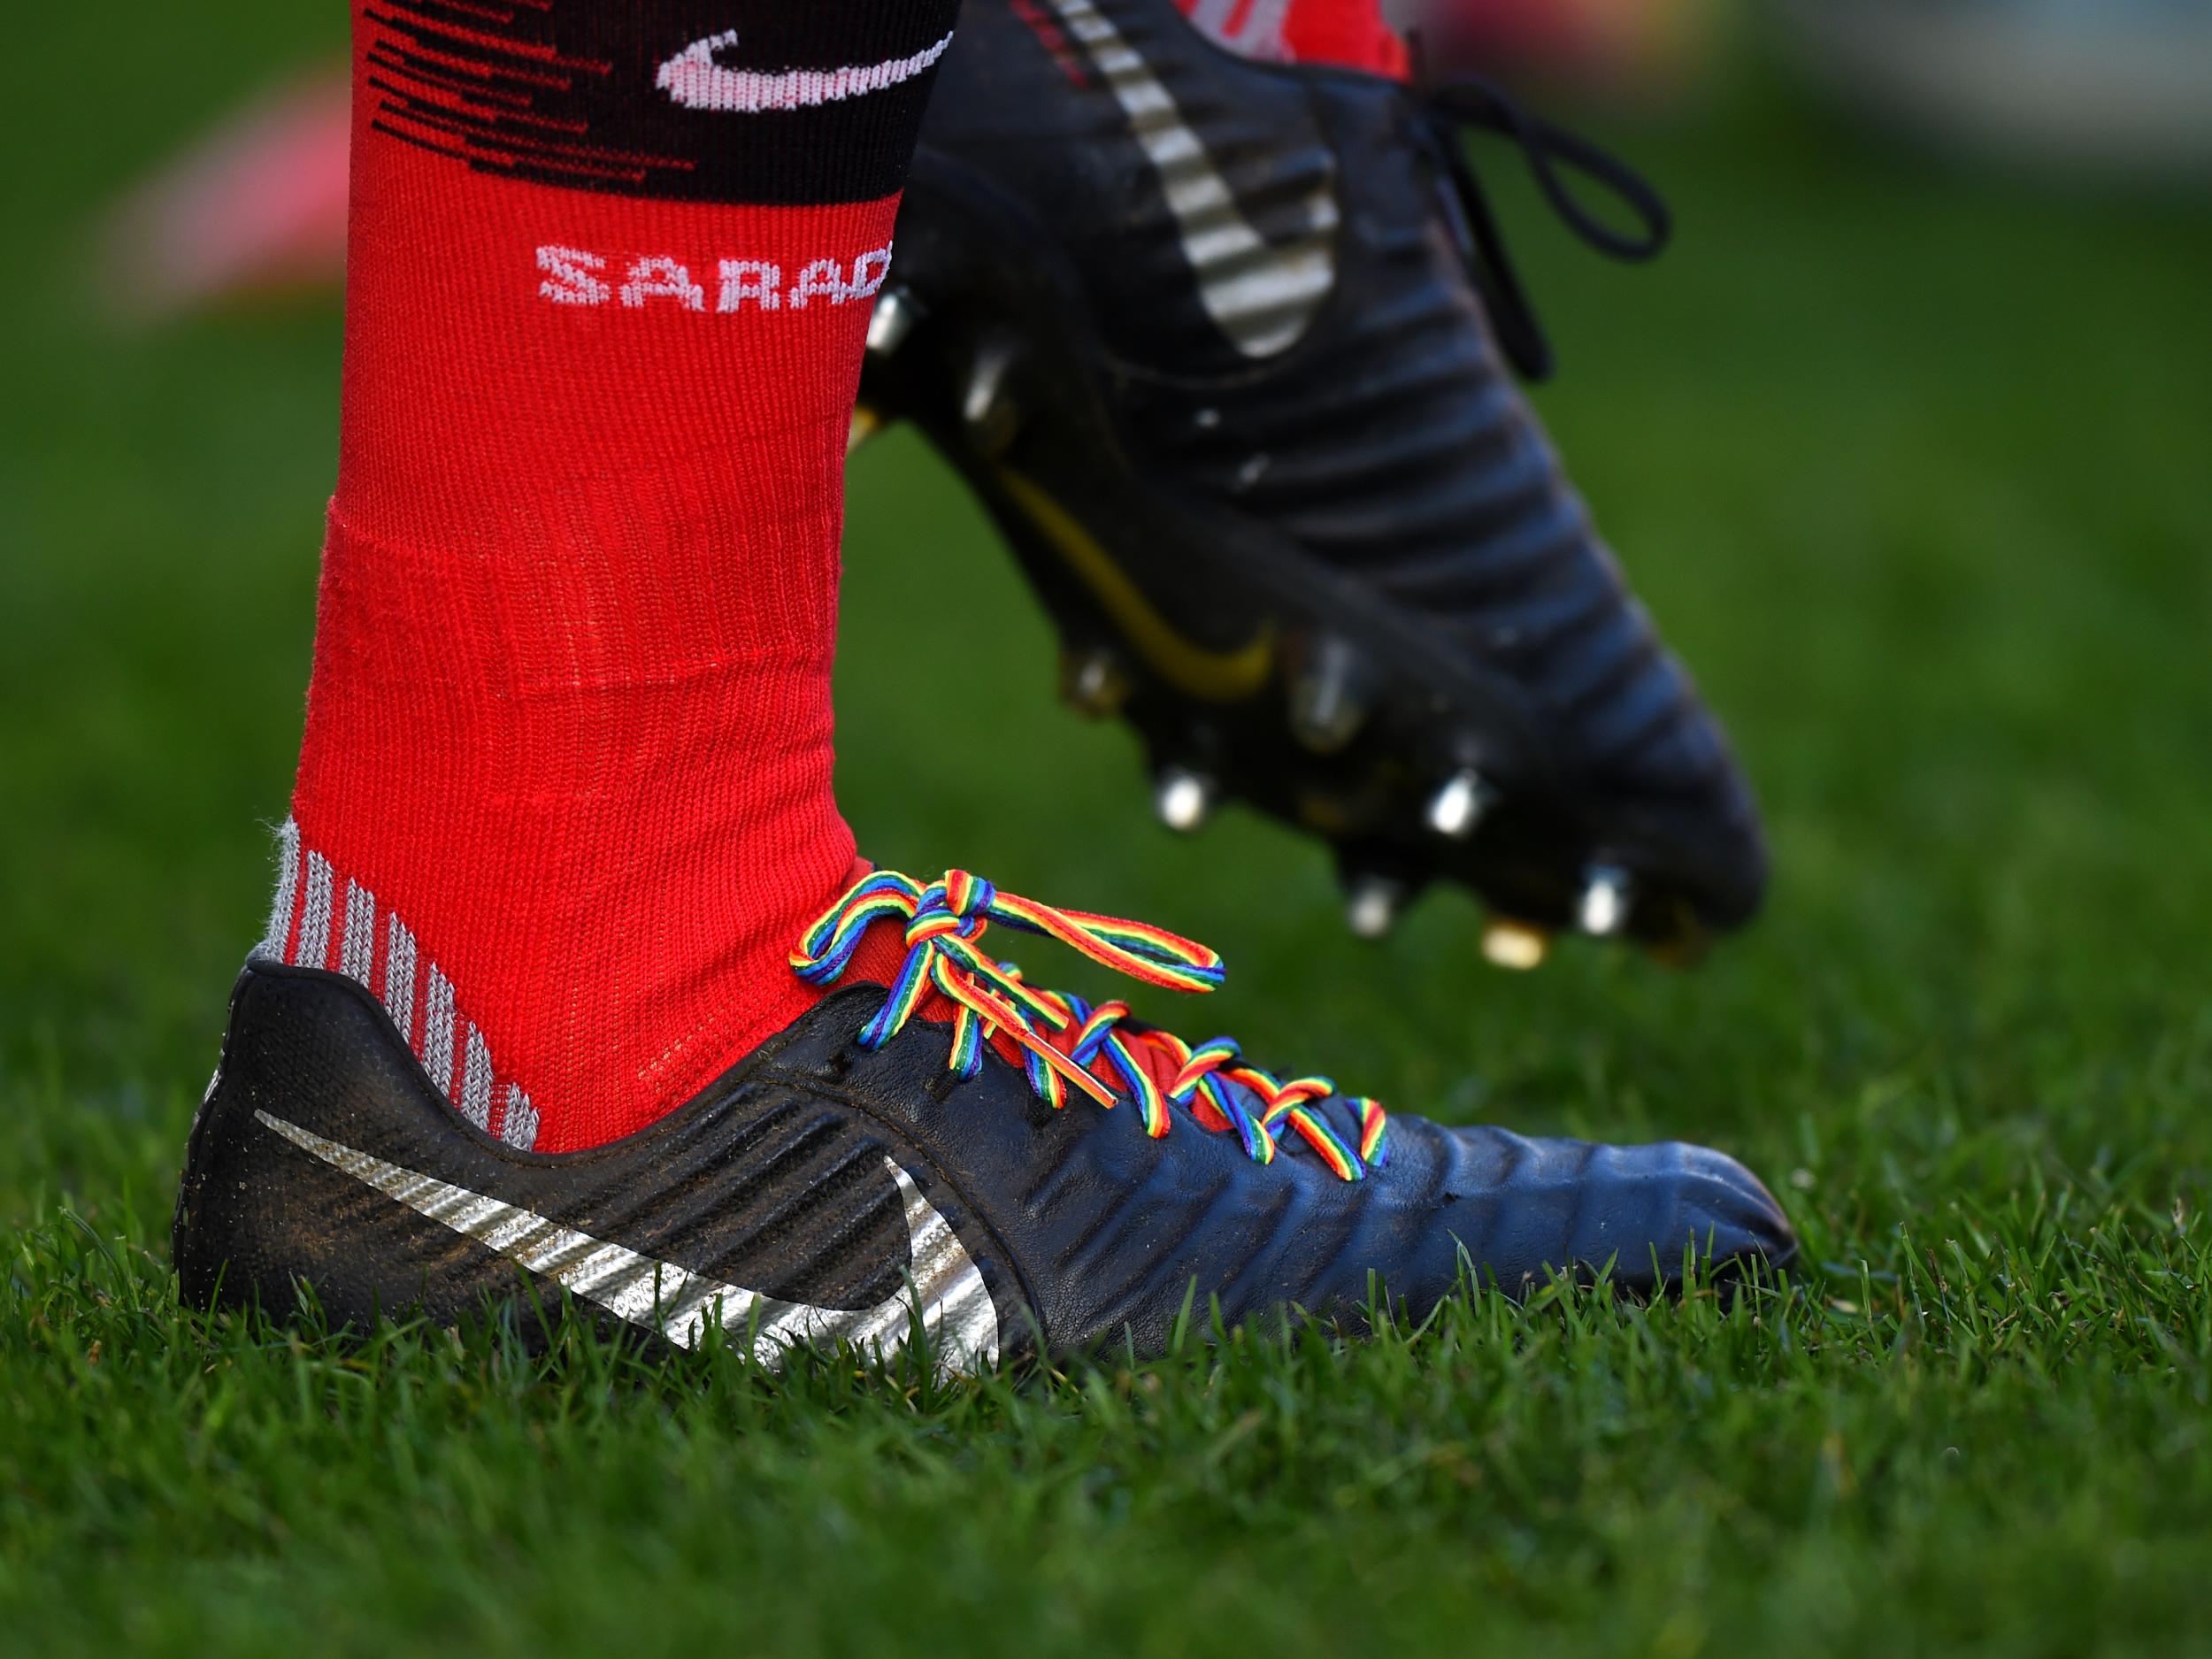 Sports teams are taking part in Stonewall's rainbow lace campaign